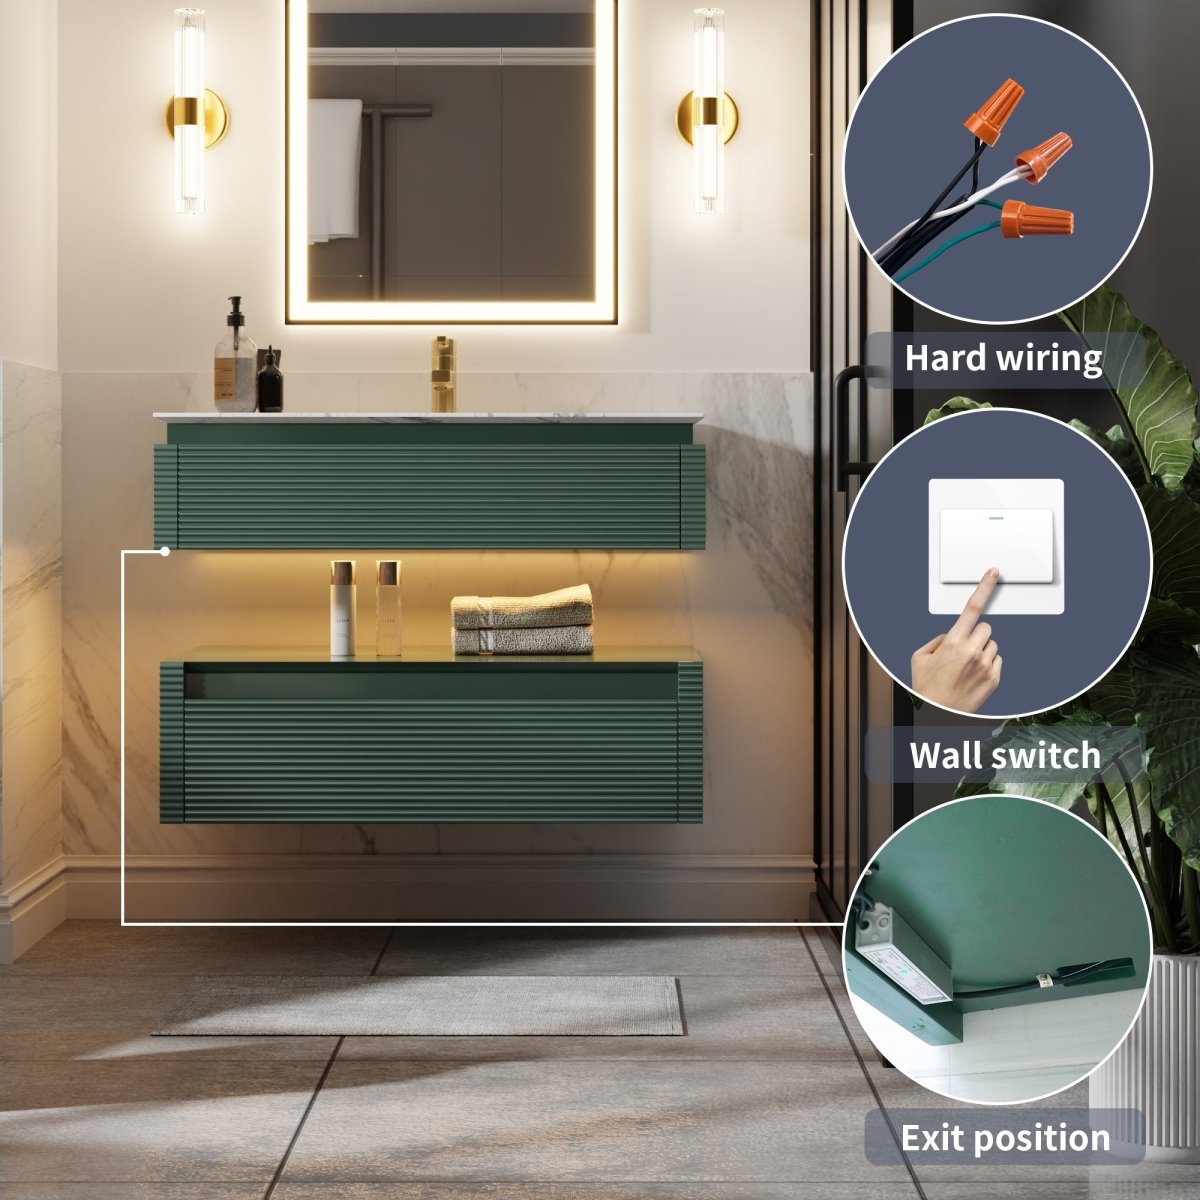 Segeo 36" Modern Solid Oak Floating Bathroom Vanity Cabinet Green with Lights and Marble Countertop